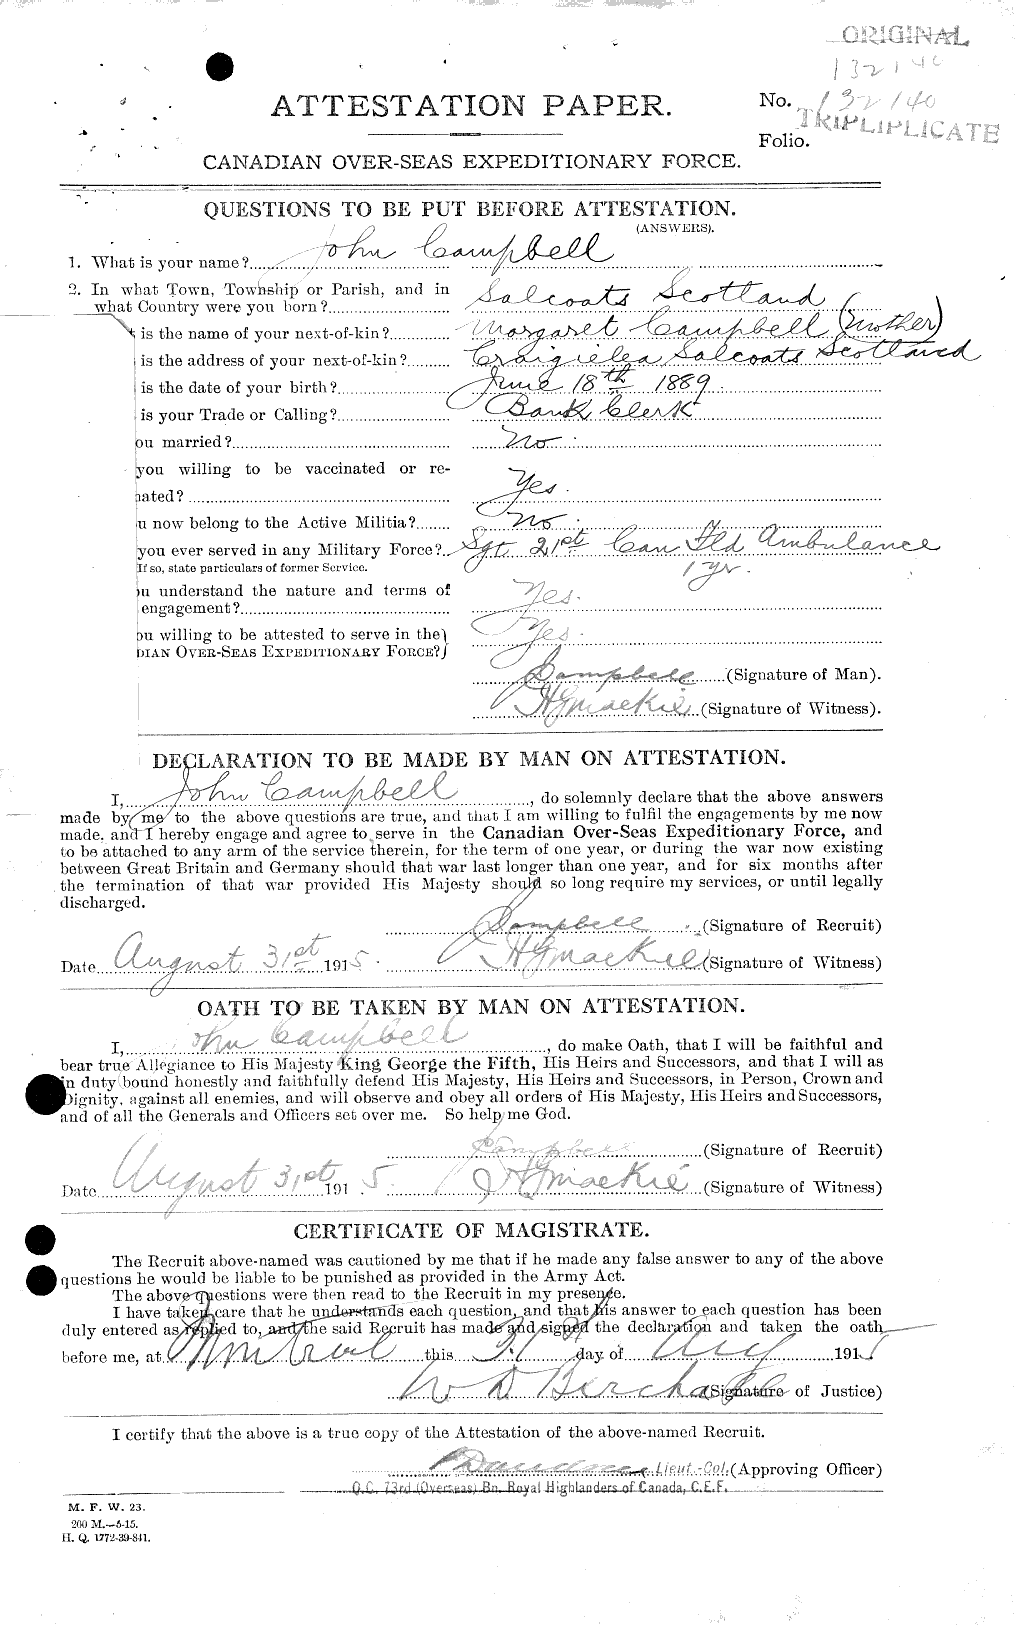 Personnel Records of the First World War - CEF 006811a